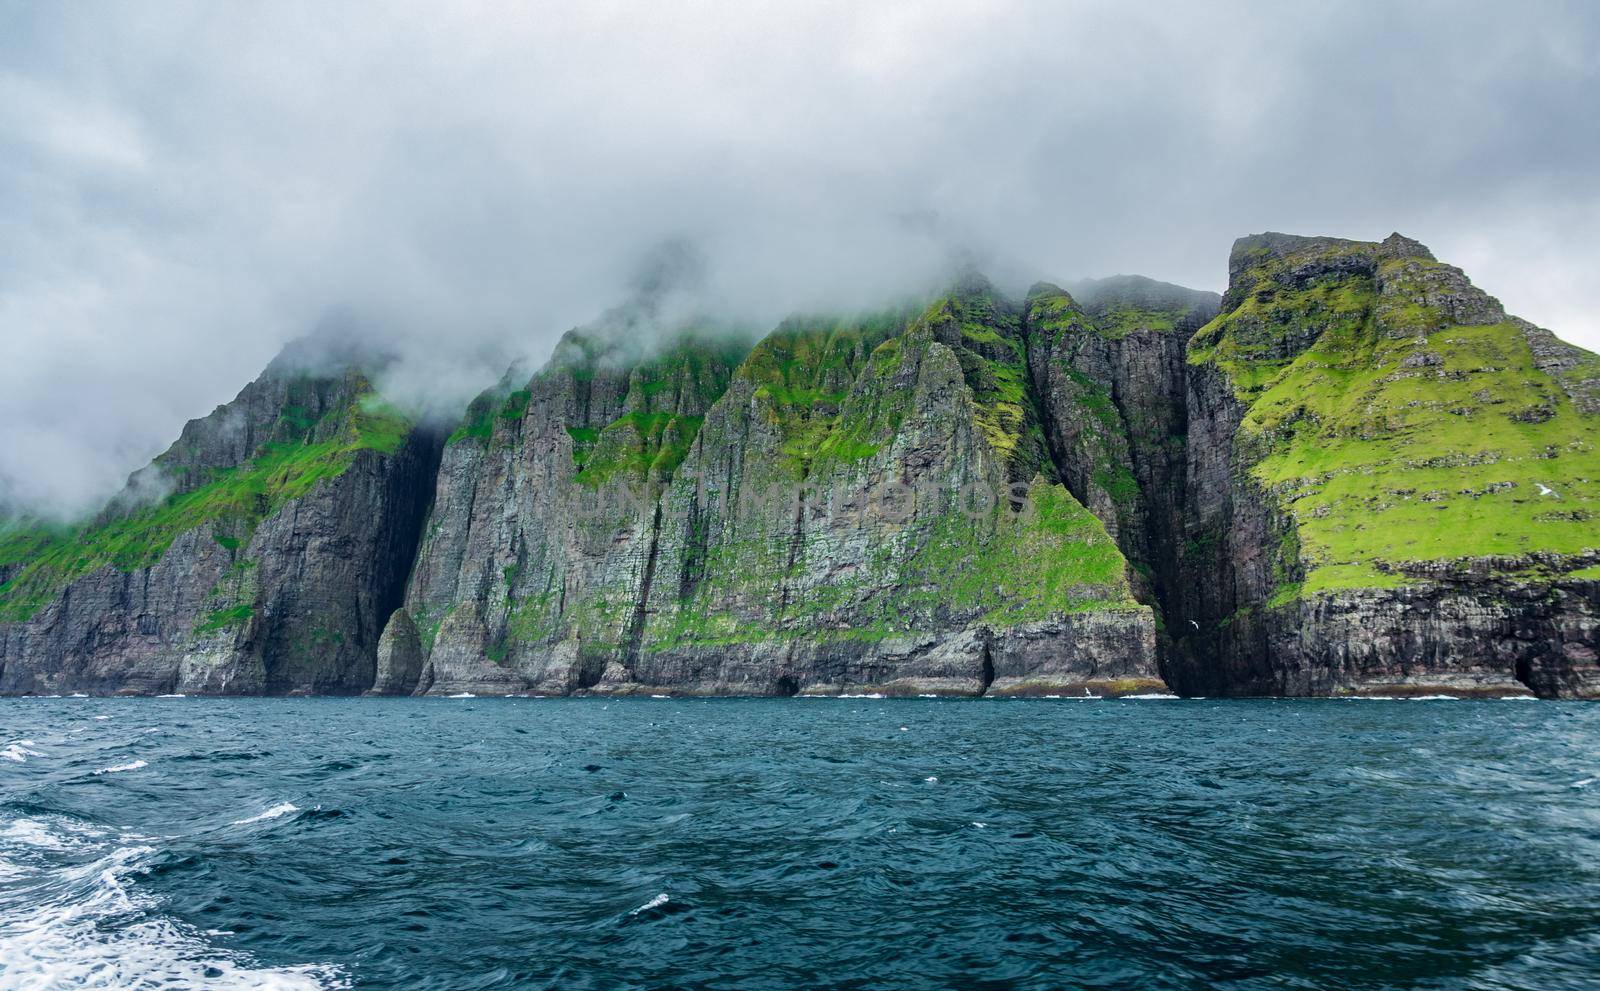 Bottom view of the spectacular Vestmanna cliffs under the mist in the Faroe Islands